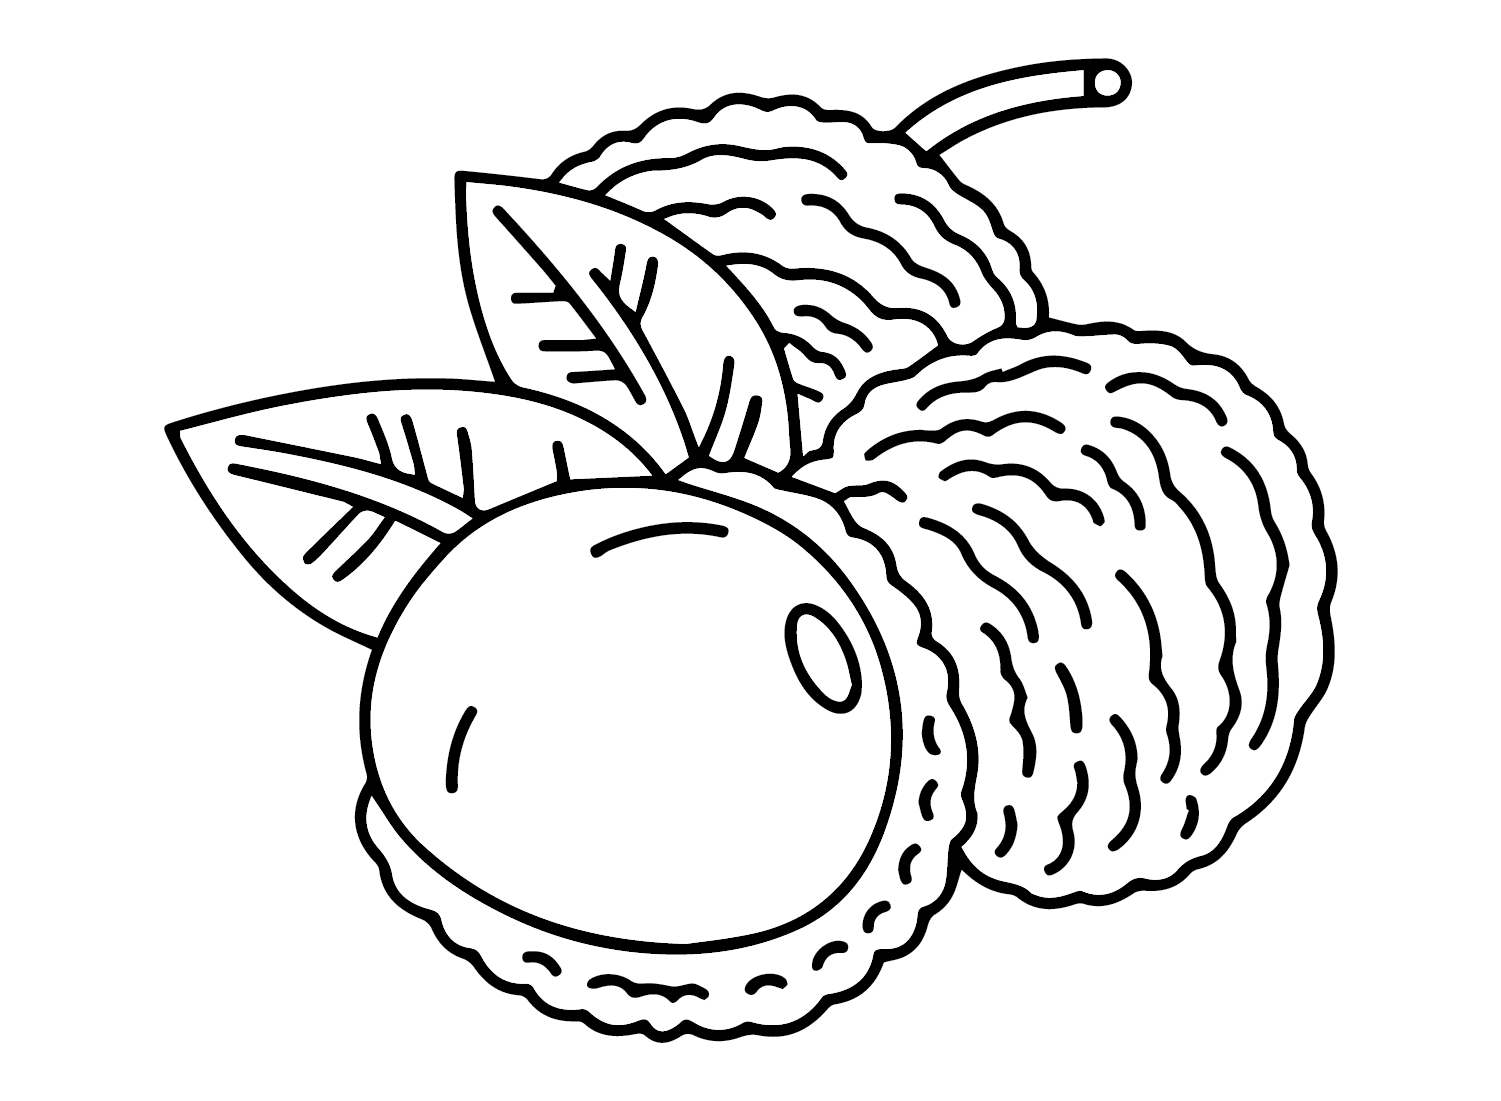 Lychee for Kids Coloring Page